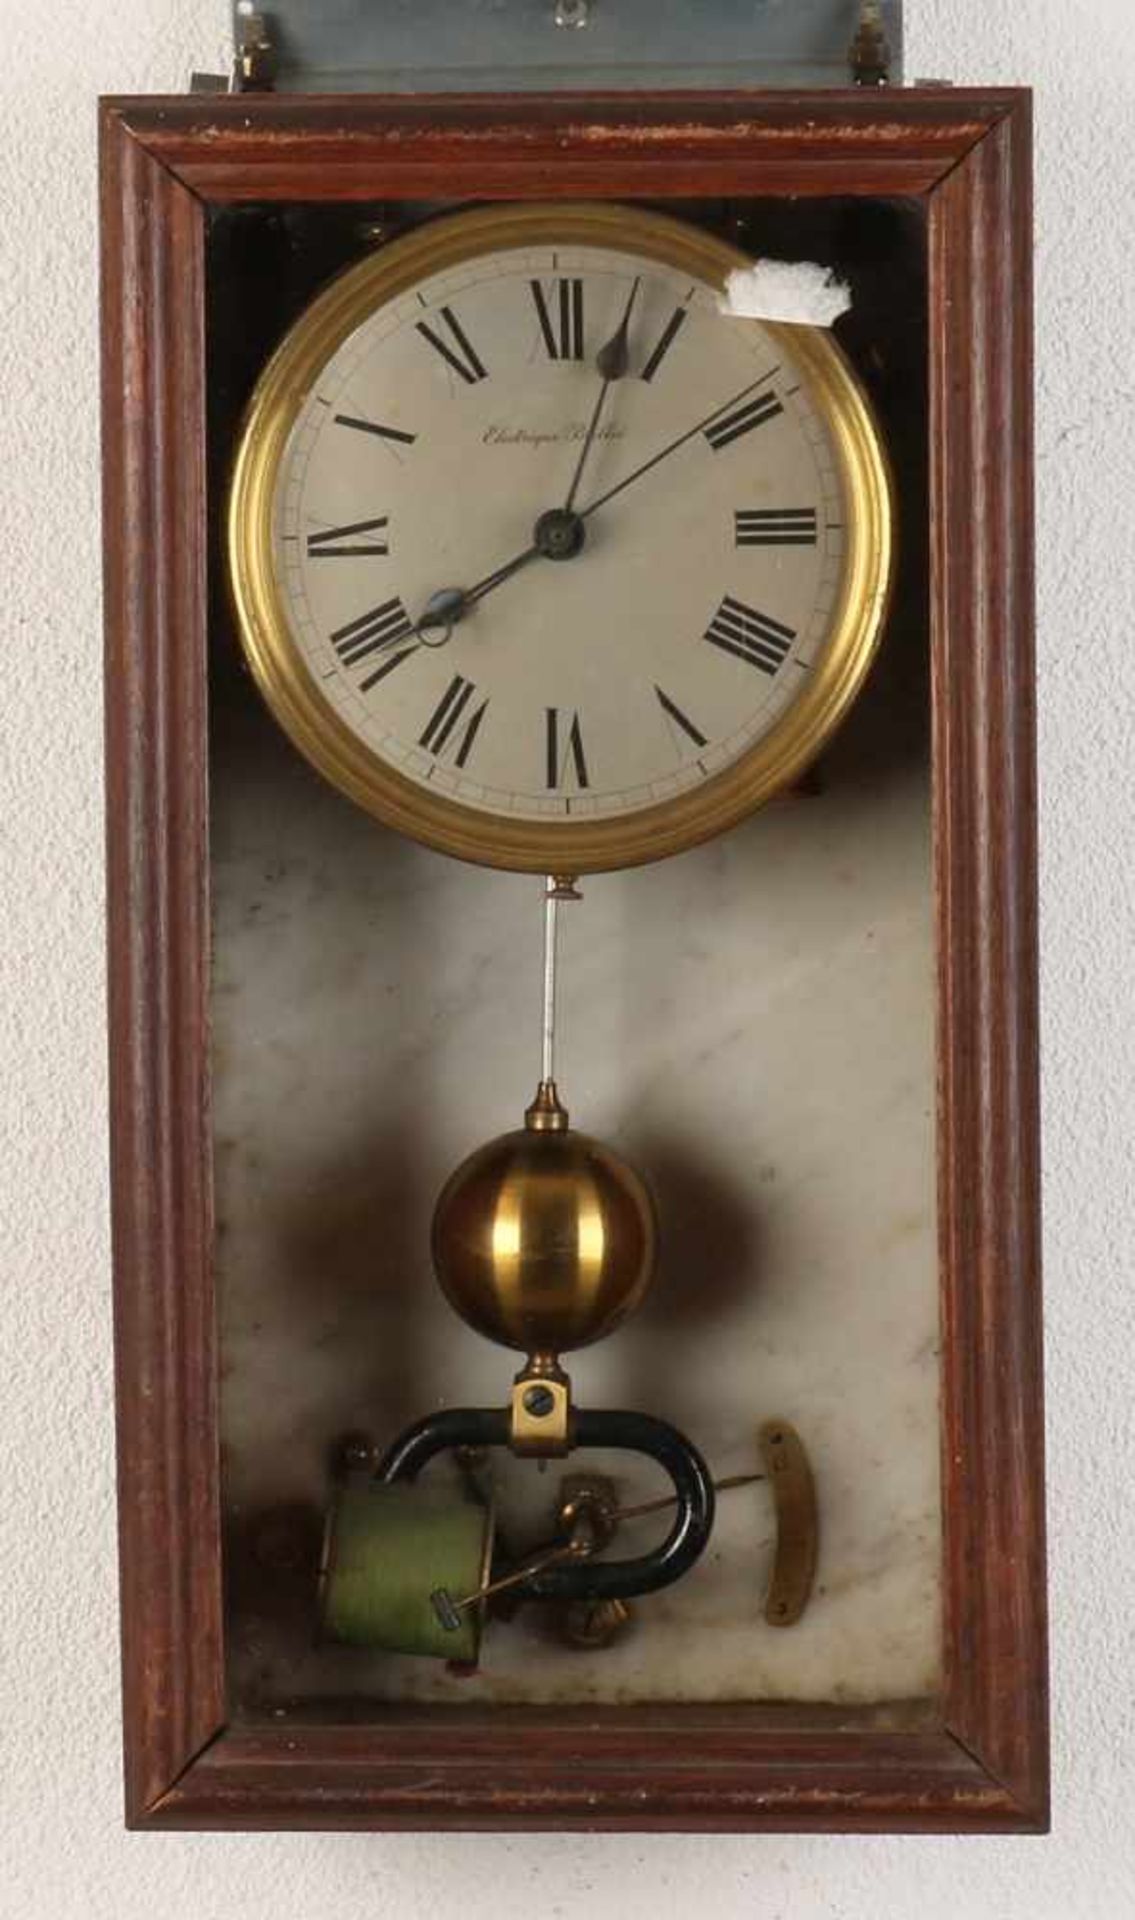 Antique French Electrique Brillie wall clock clock with oak cabinet and central seconds hand.